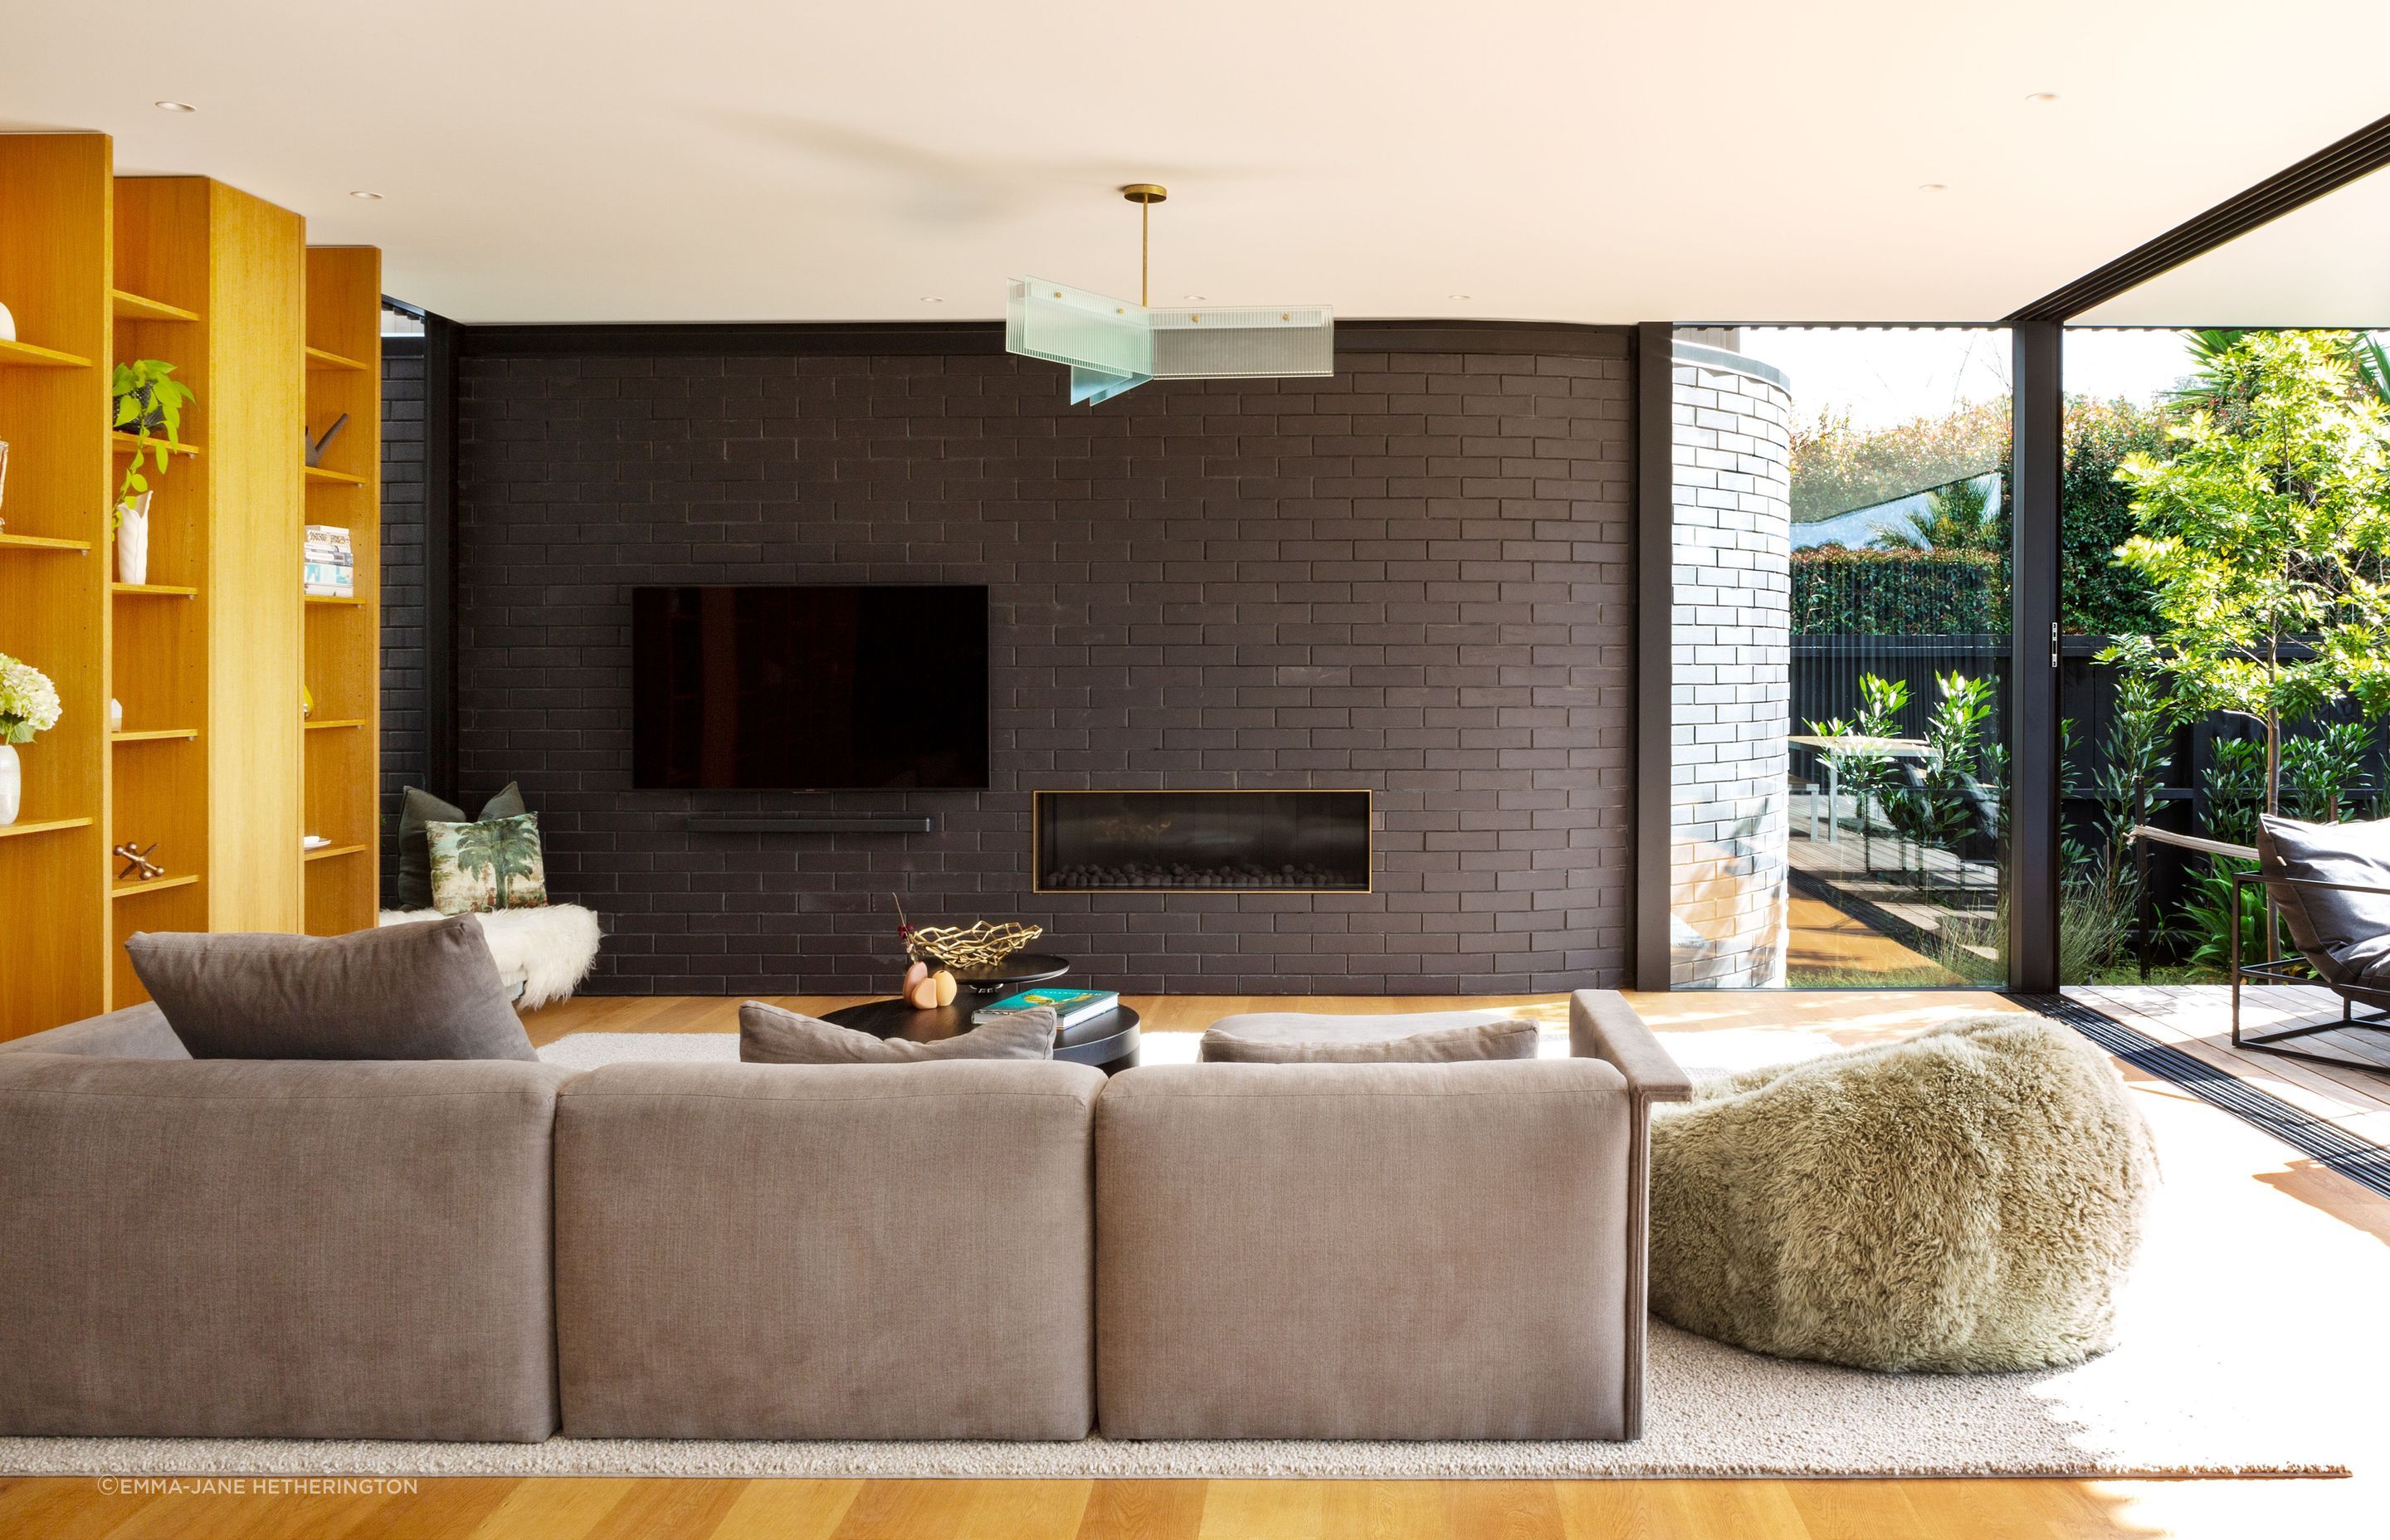 “This is the side wall of the house almost peeling out. It’s like kinetic movement: the idea that the house has opened itself up to the view,” says Tim. The insert around the Escea fireplace was made by Powersurge. The couch is from Simon James.